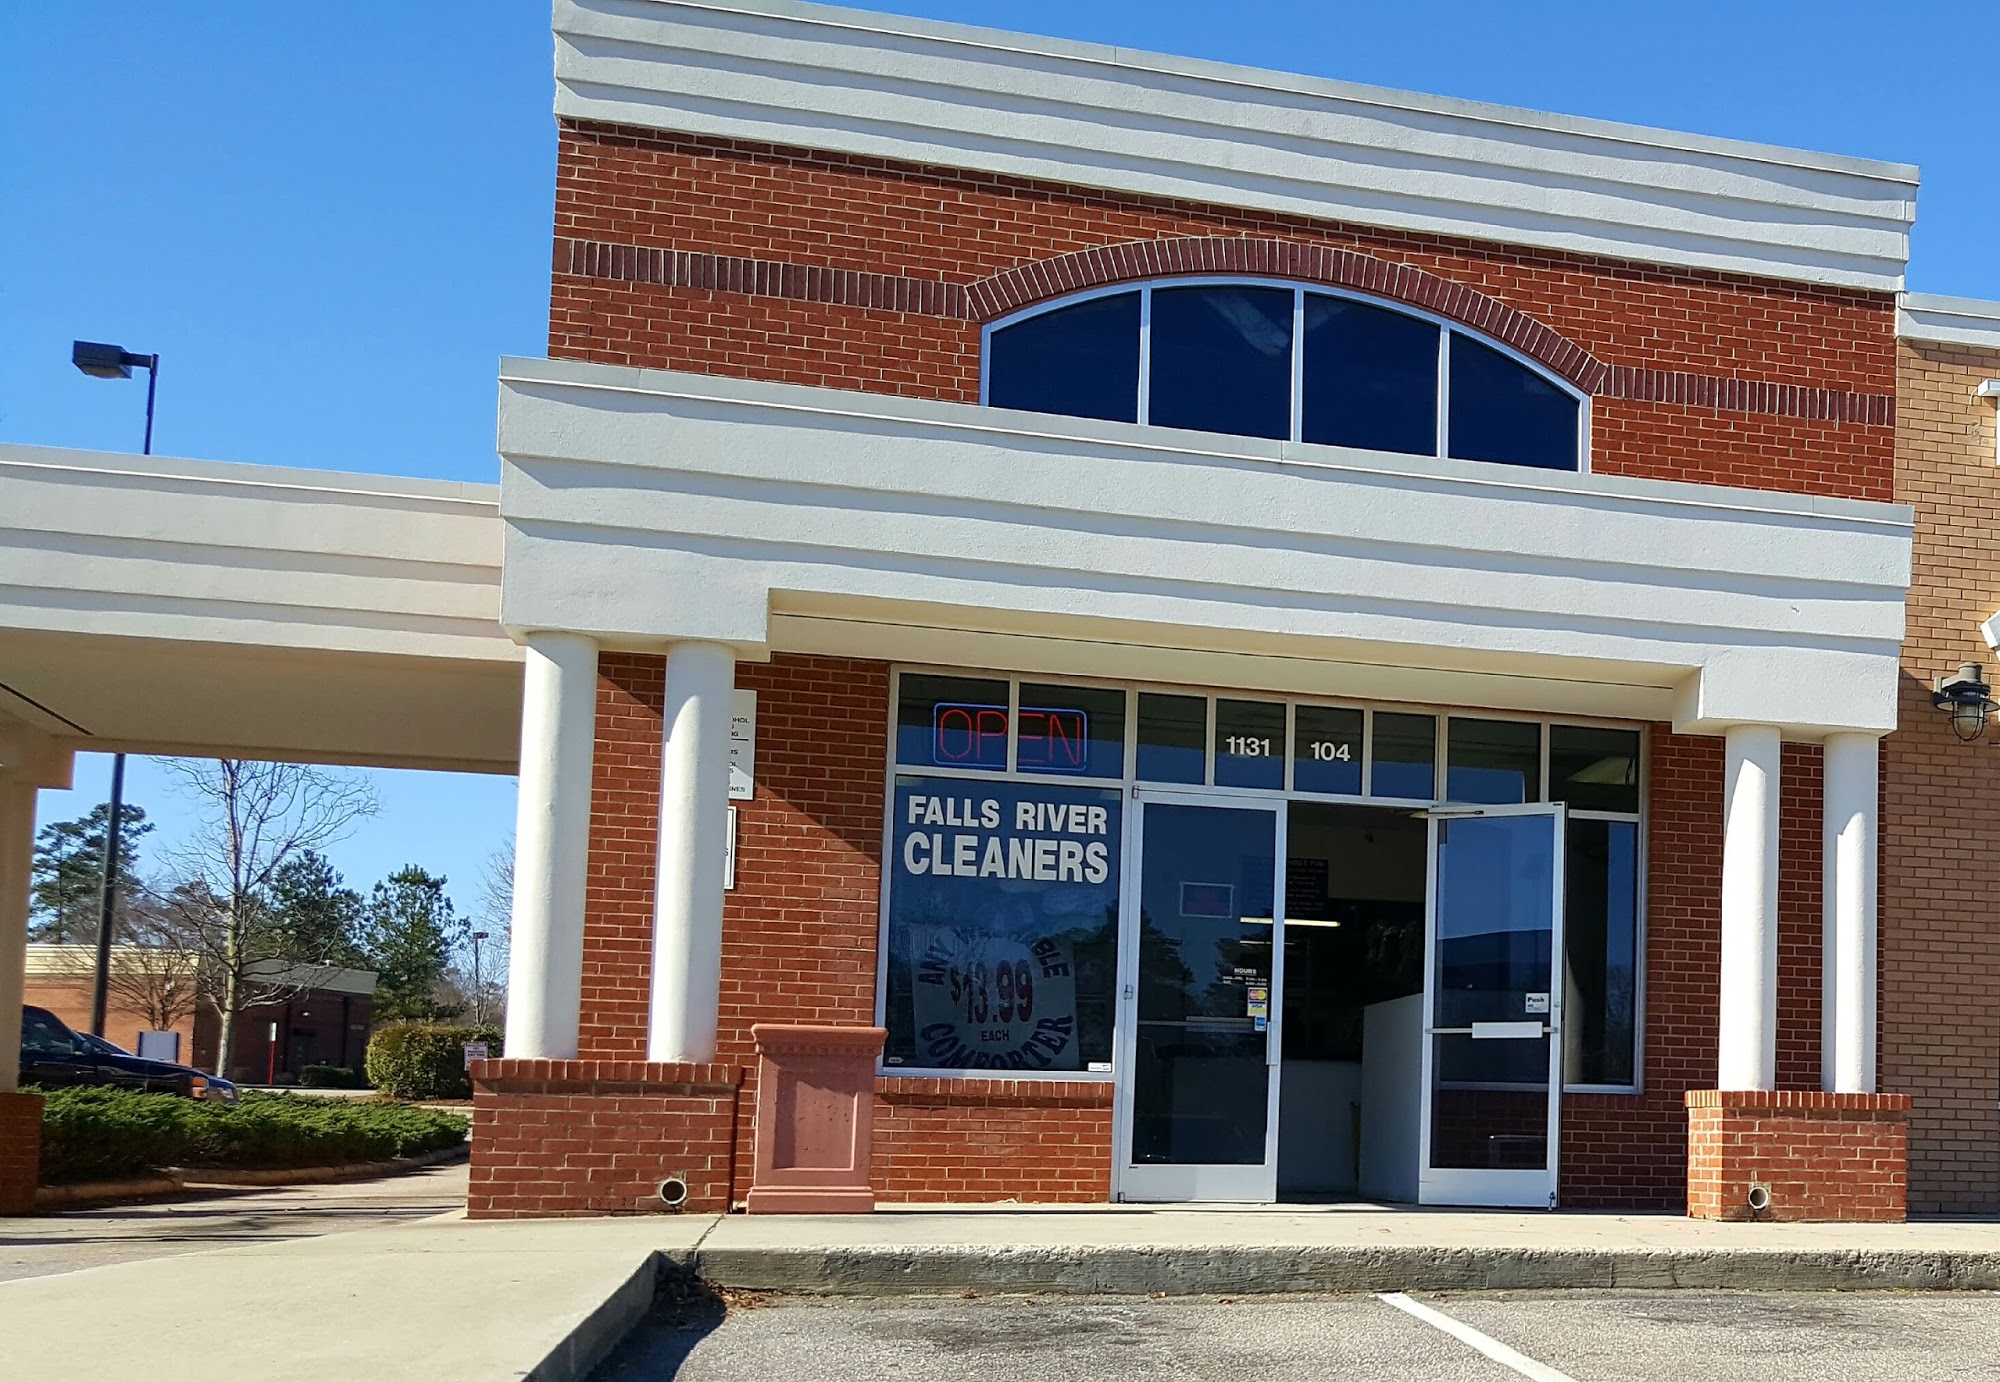 Falls River Cleaners